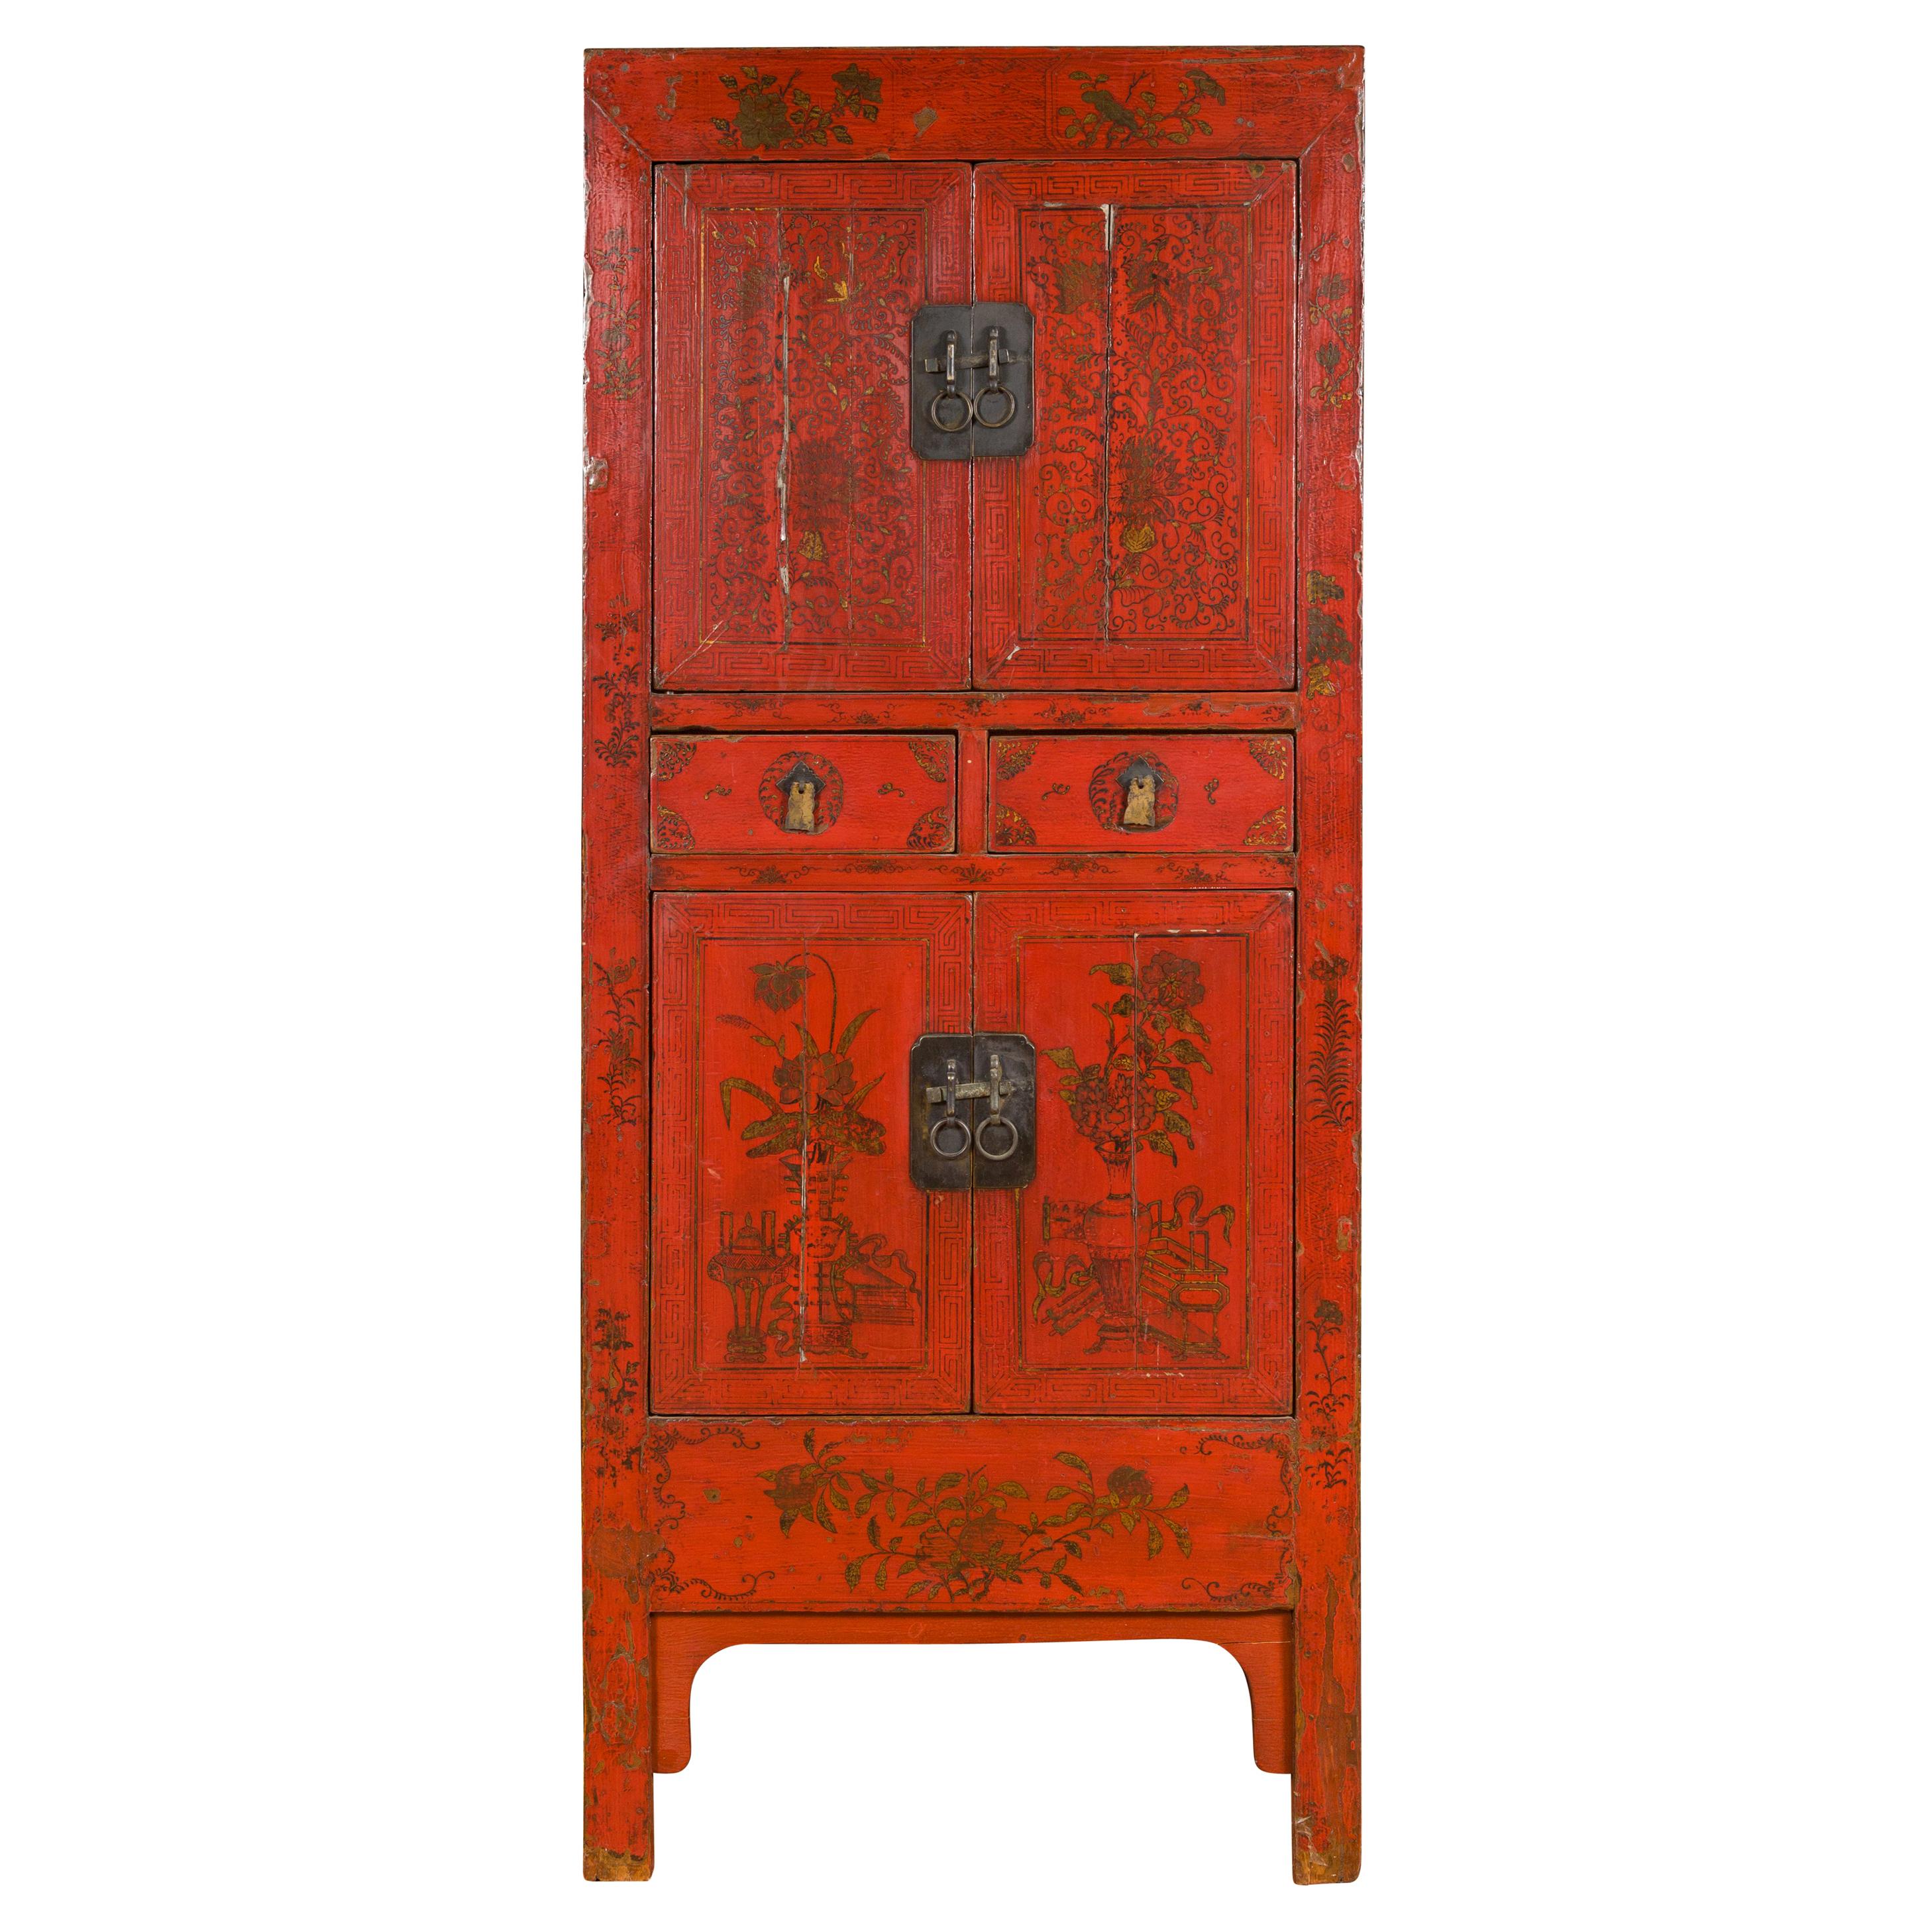 Chinese Qing Dynasty 19th Century Red Lacquered Cabinet with Gold Floral Motifs